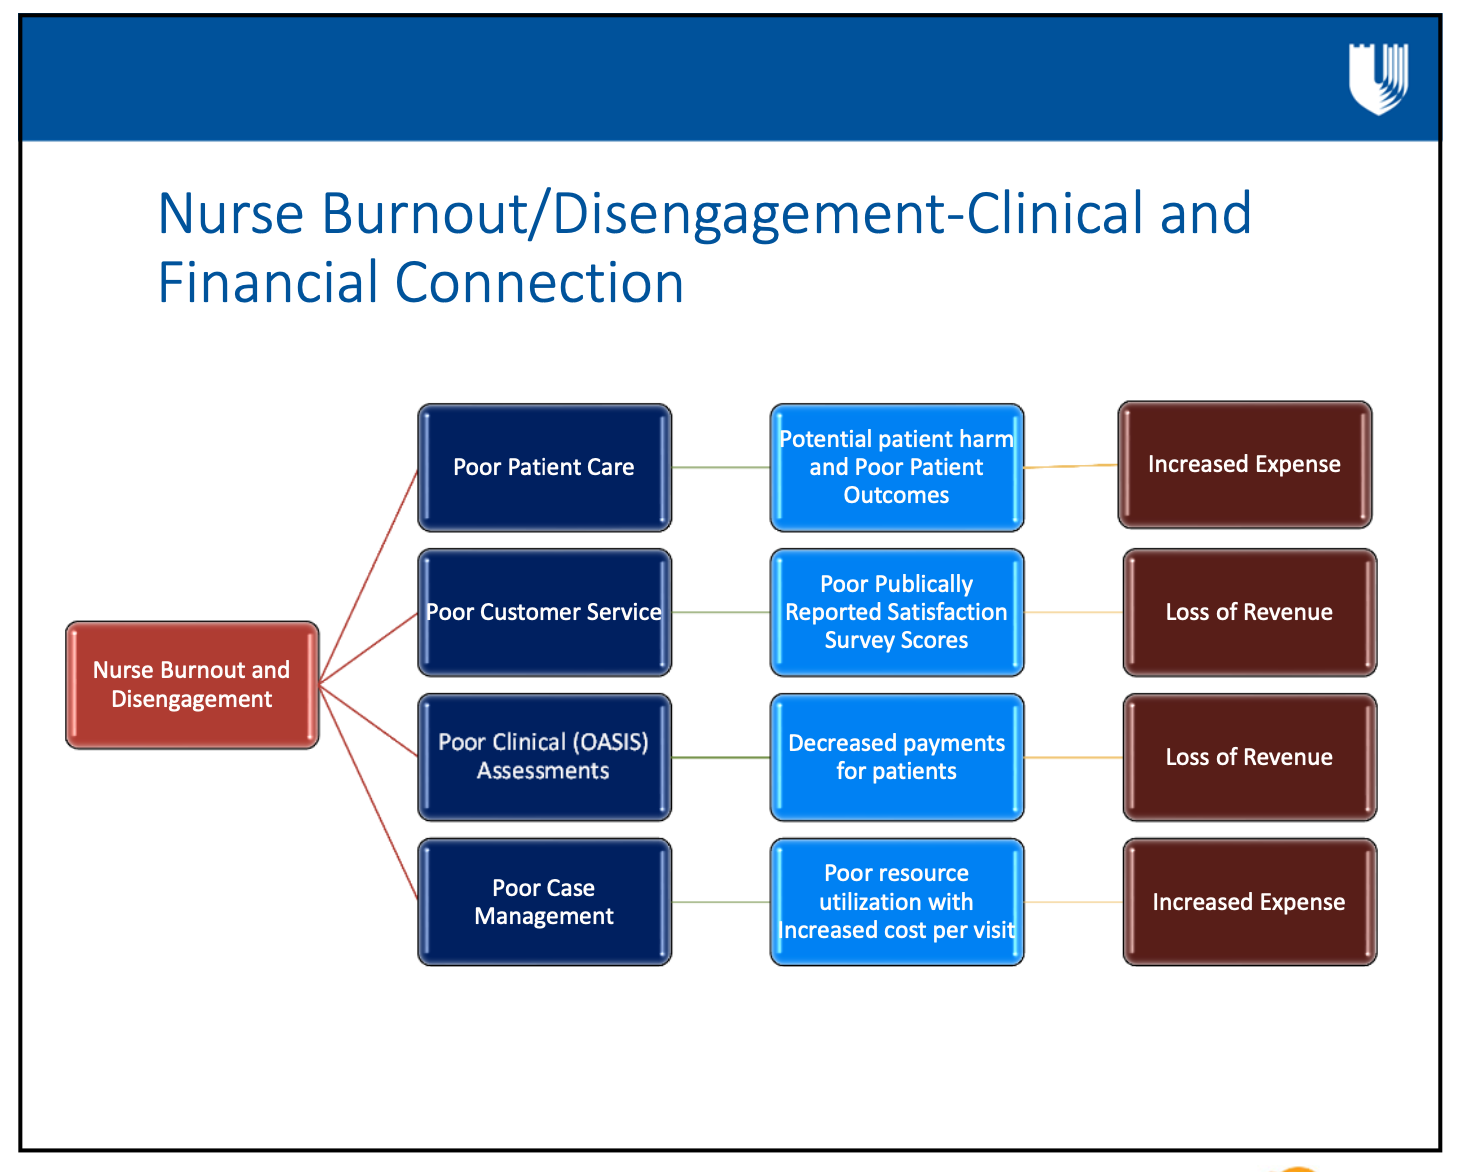 nurse burnout and disengagement clinical and financial connection - Duke Health